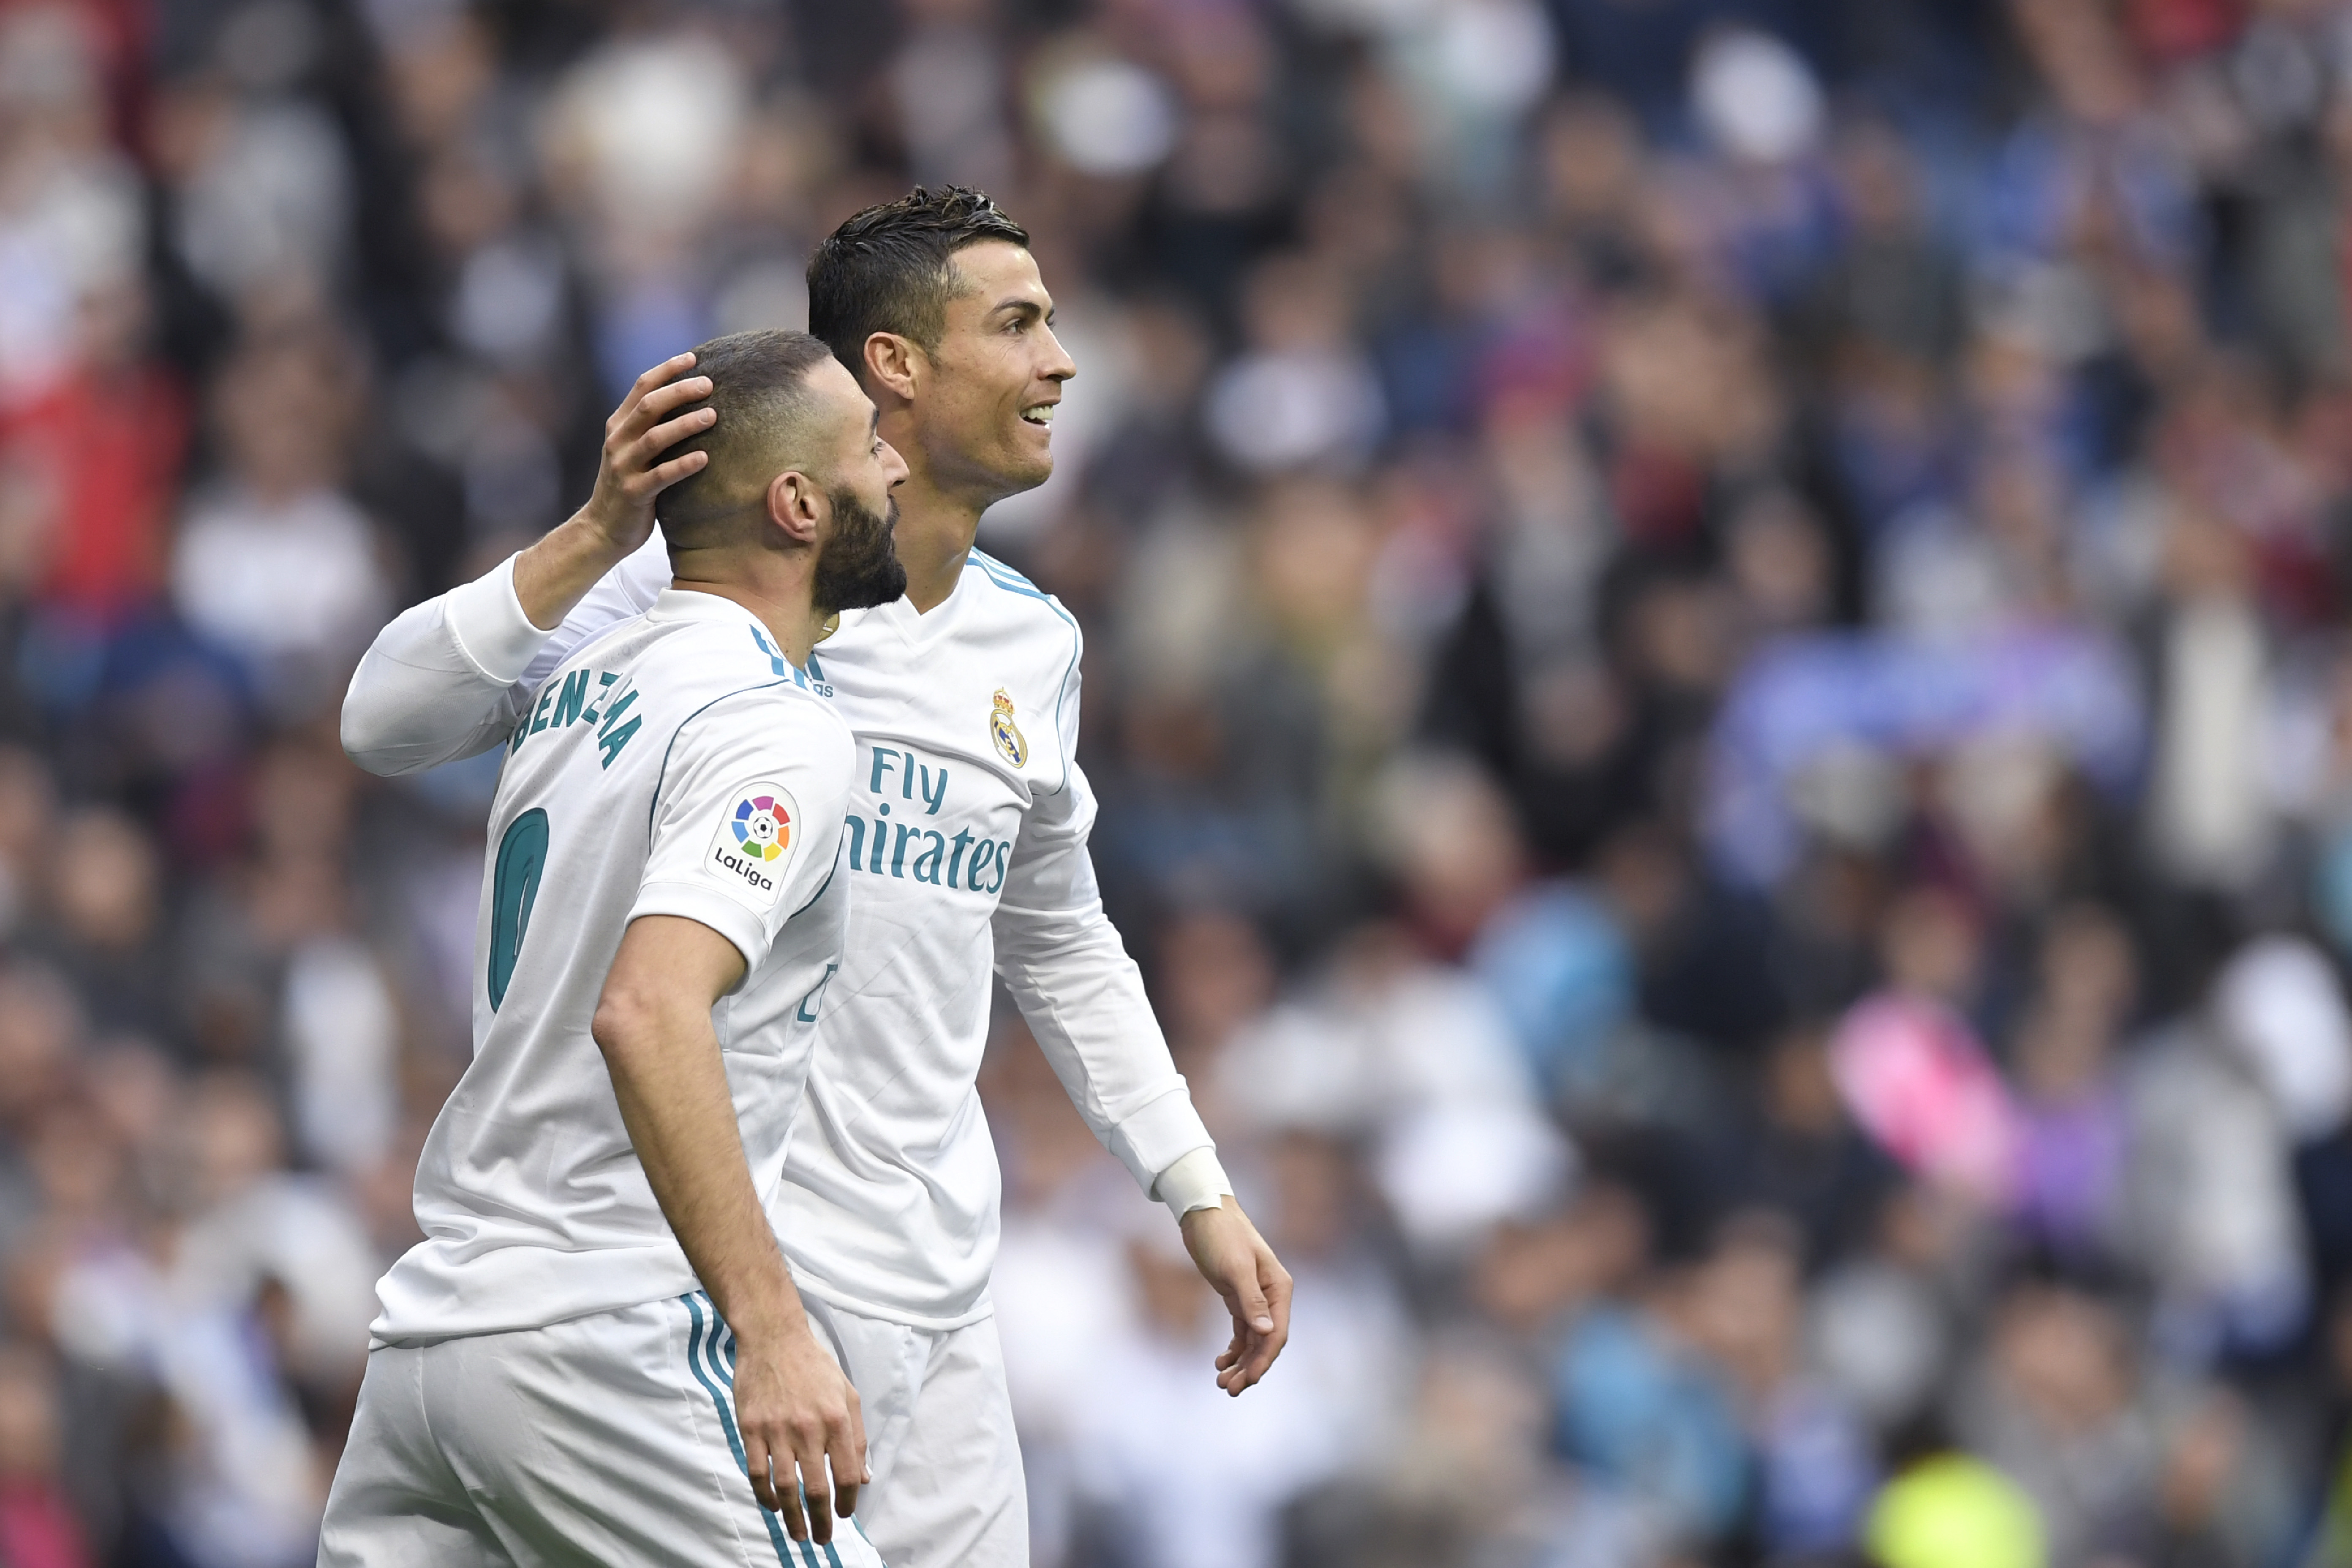 Real Madrid's French forward Karim Benzema (L) celebrates with Real Madrid's Portuguese forward Cristiano Ronaldo  after scoring during the Spanish league football match Real Madrid CF against Malaga CF on 25, November 2017 at the Santiago Bernabeu stadium in Madrid. / AFP PHOTO / GABRIEL BOUYS        (Photo credit should read GABRIEL BOUYS/AFP/Getty Images)